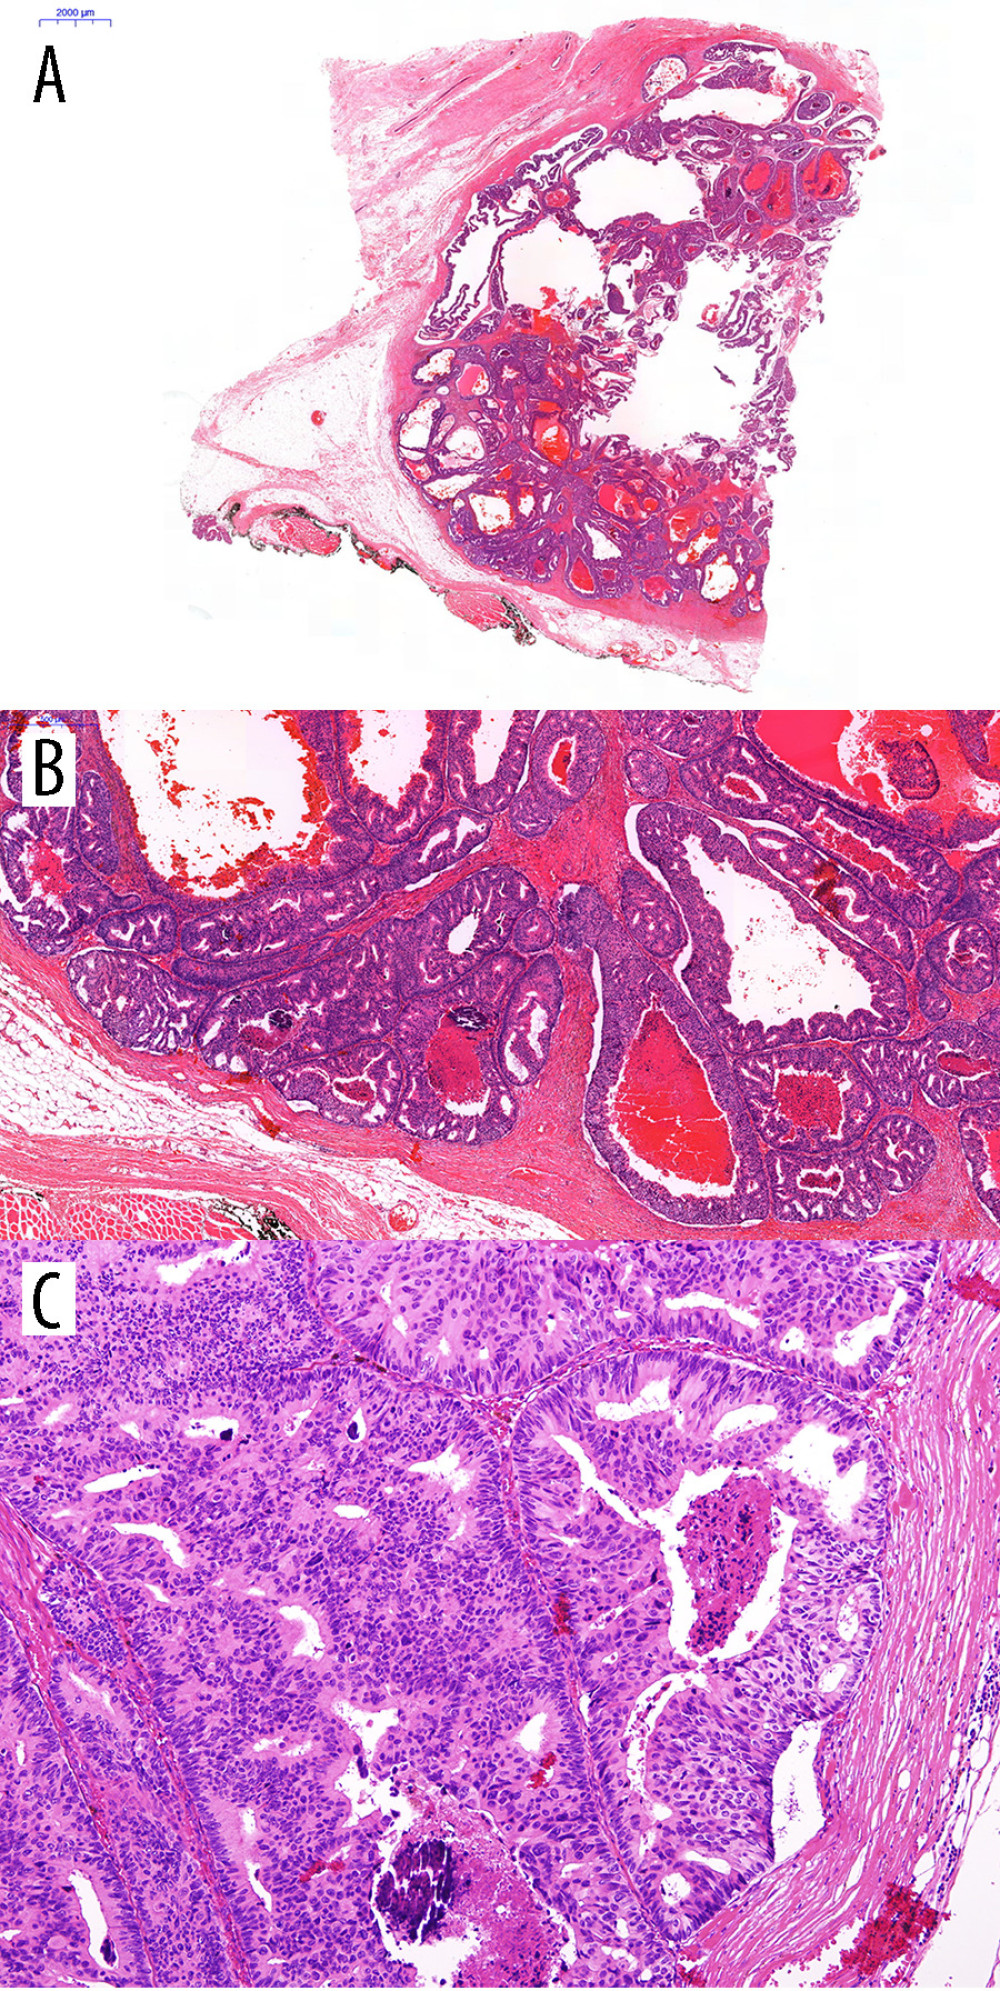 Microscopic appearance of the breast tumor. (A) Scan view of the breast lesion reveals a mass with pushing borders and hemorrhage. (B) The tumor is composed of more than 90% cribriform glands with comedo necrosis and dystrophic calcification, diagnostic for cribriform carcinoma of the breast (H&E stain, 4× objective). (C) On higher power, the carcinoma is composed of atypical cells with moderate pleomorphism, consistent with nuclear grade 2 (H&E stain, 10× objective). H&E – hematoxylin and eosin.